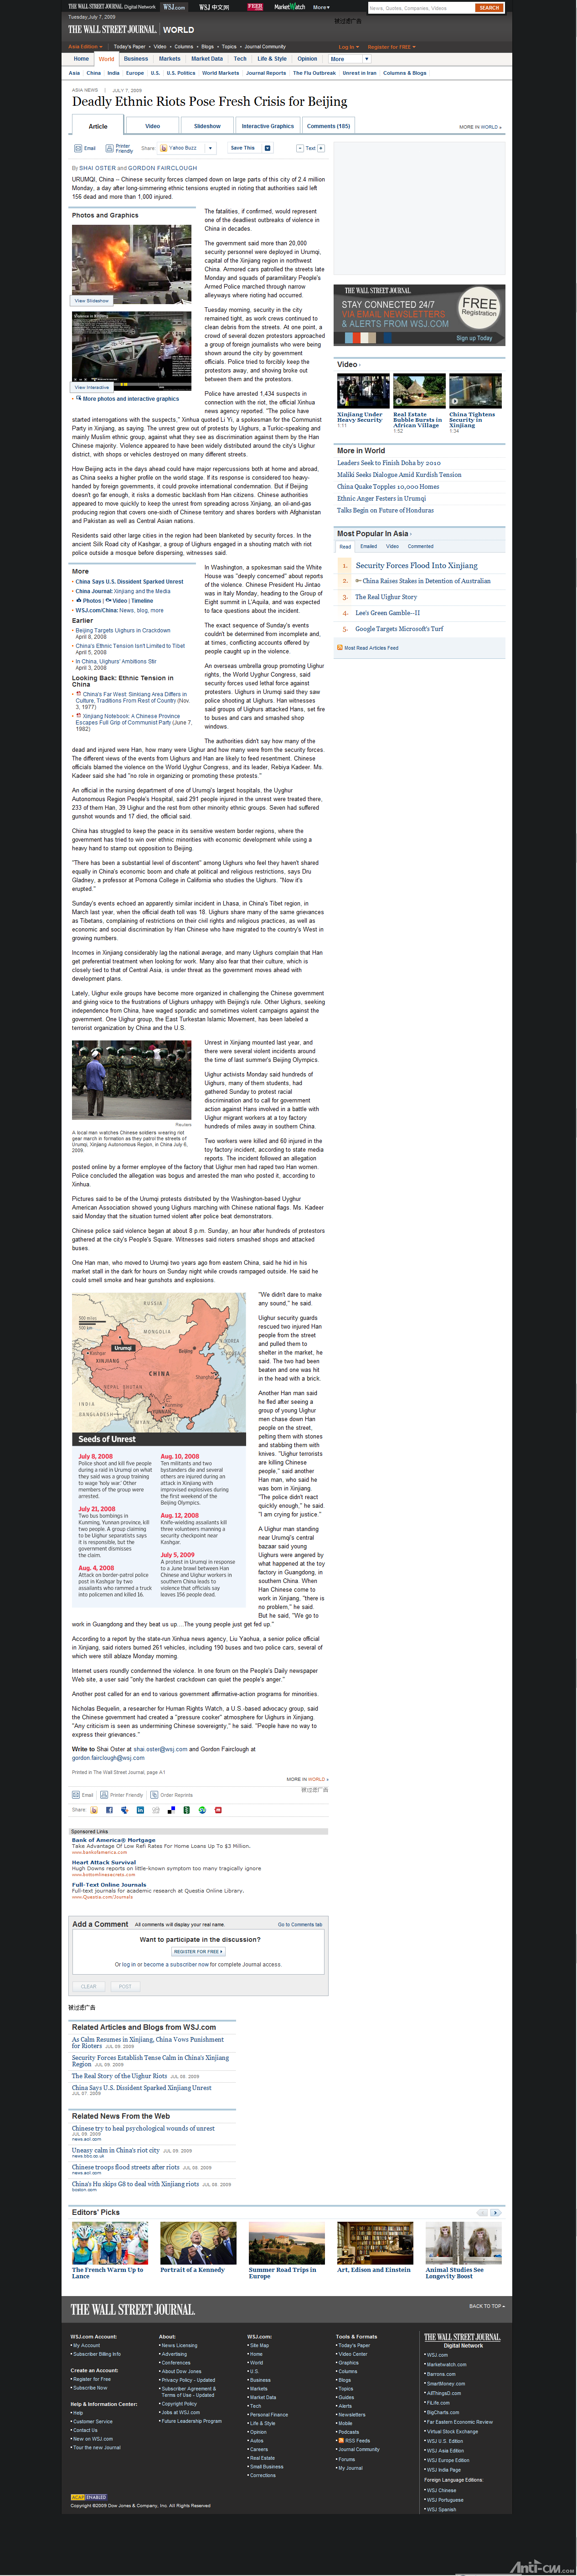 WSJ-Deadly Ethnic Riots Pose Fresh Crisis for Beijing.png